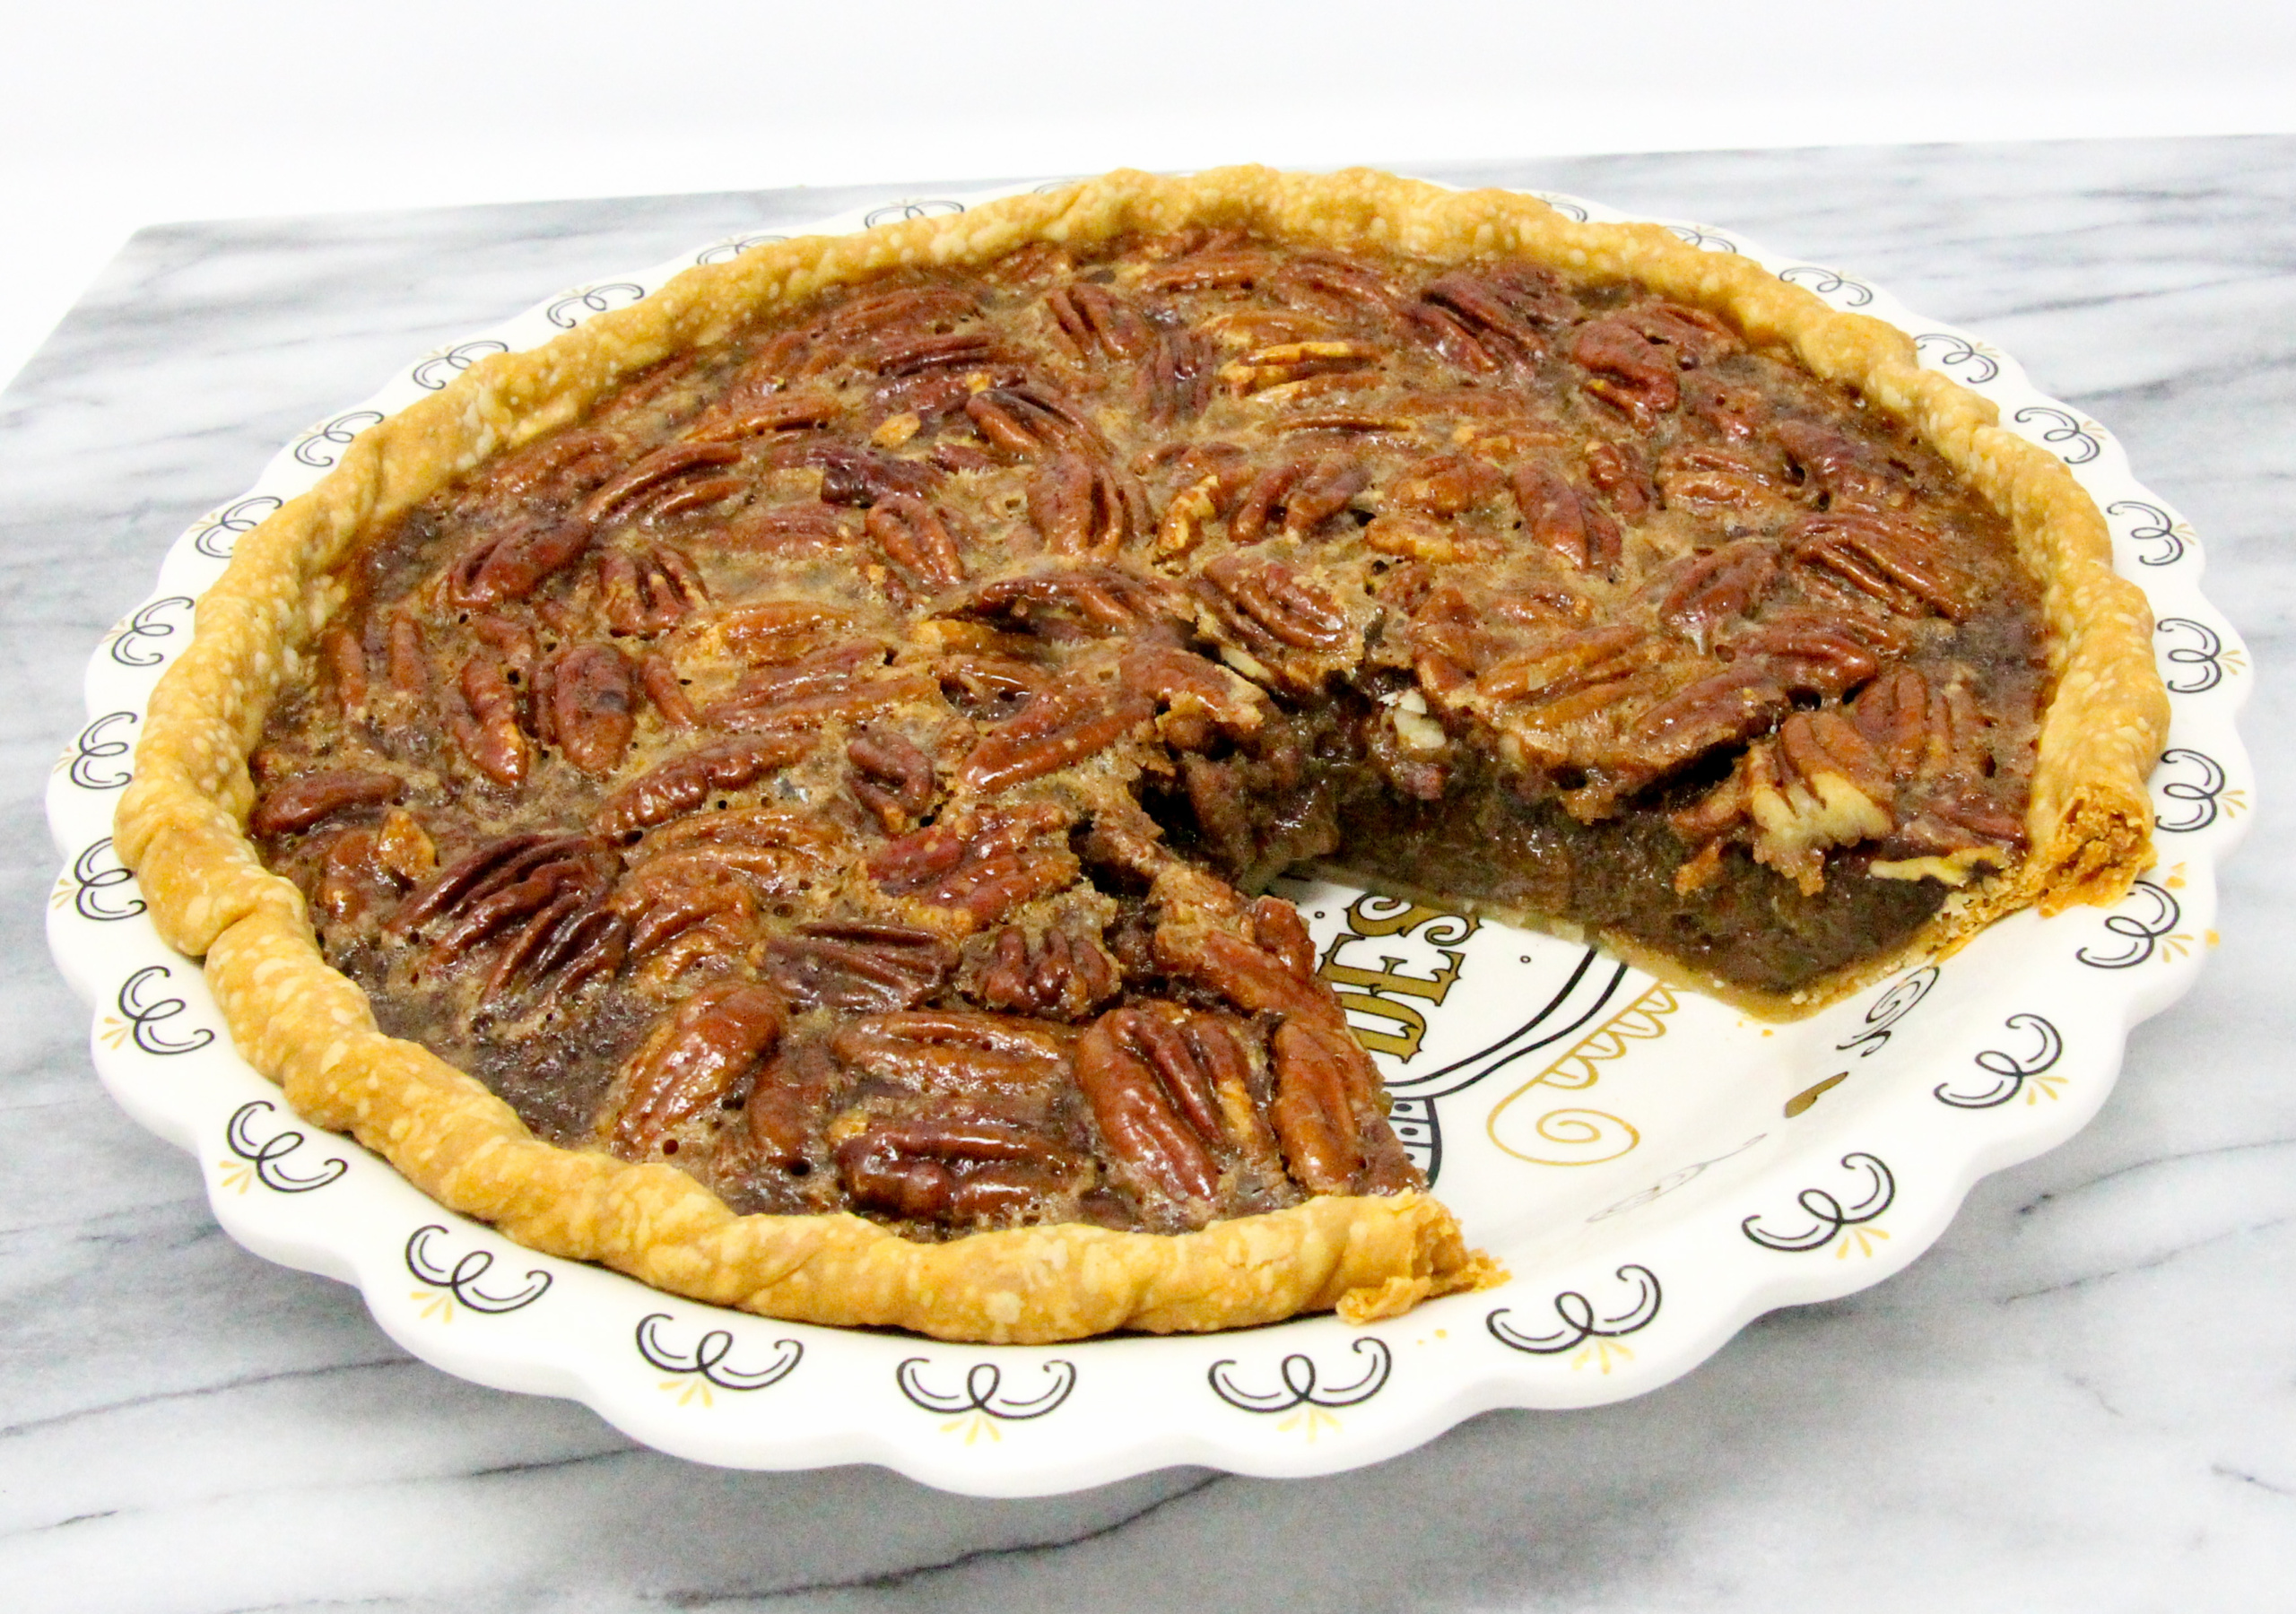 Cardamom Pecan Pie has plenty of natural sweetness thanks to maple syrup and a generous amount of pecans. The hint of cardamom elevates the flavor to scrumptious! Recipe shared with permission granted by Barbara Ross, author of MUDDLED THROUGH.